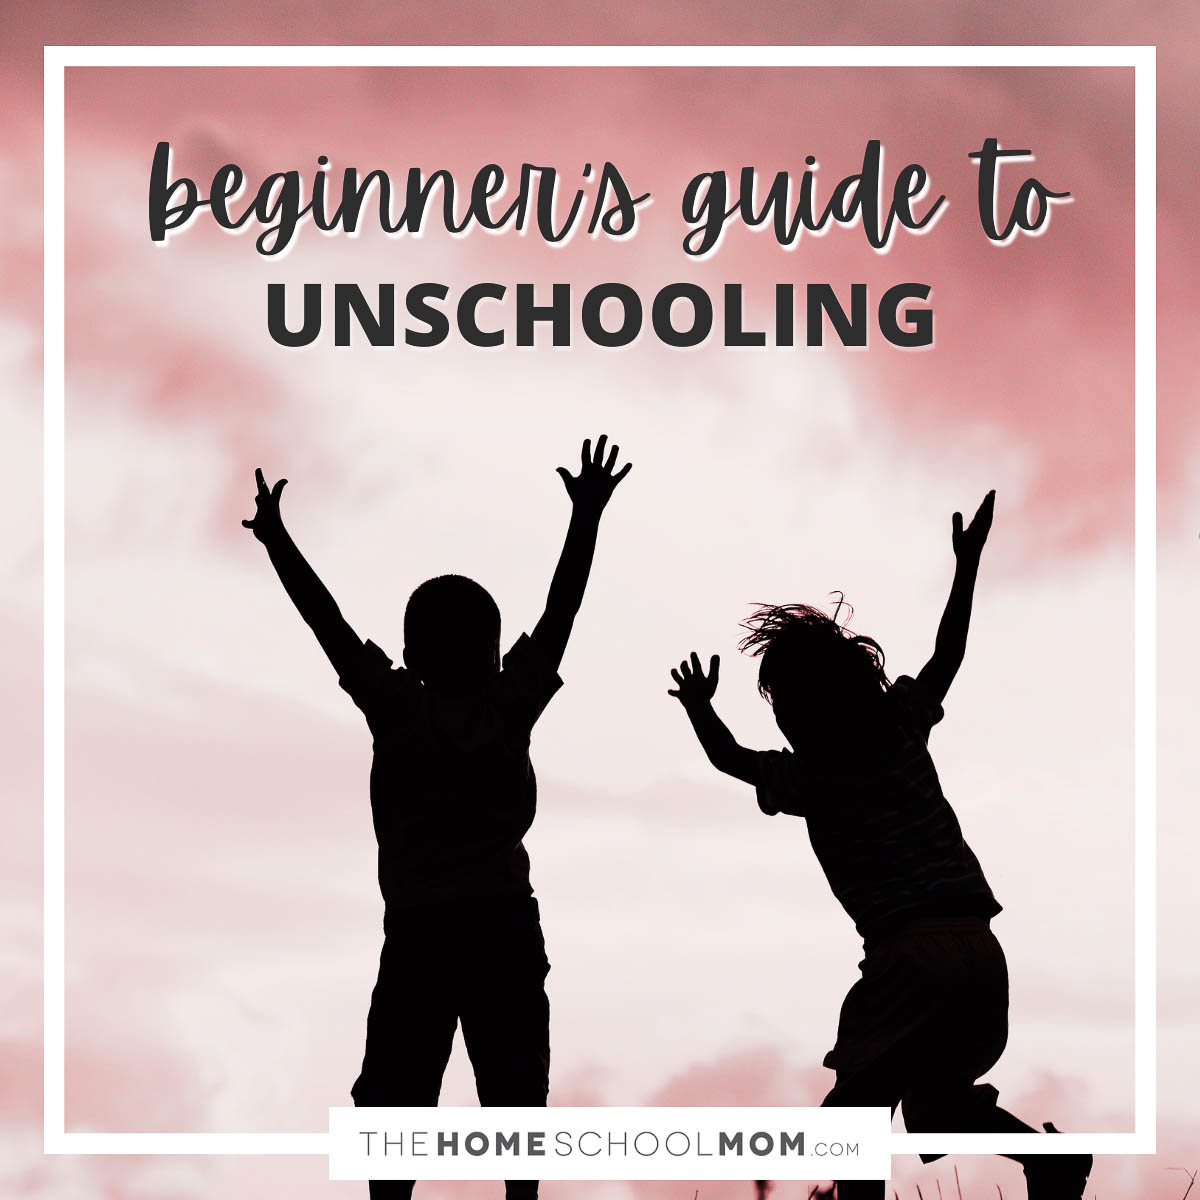 Beginner's guide to unschooling.